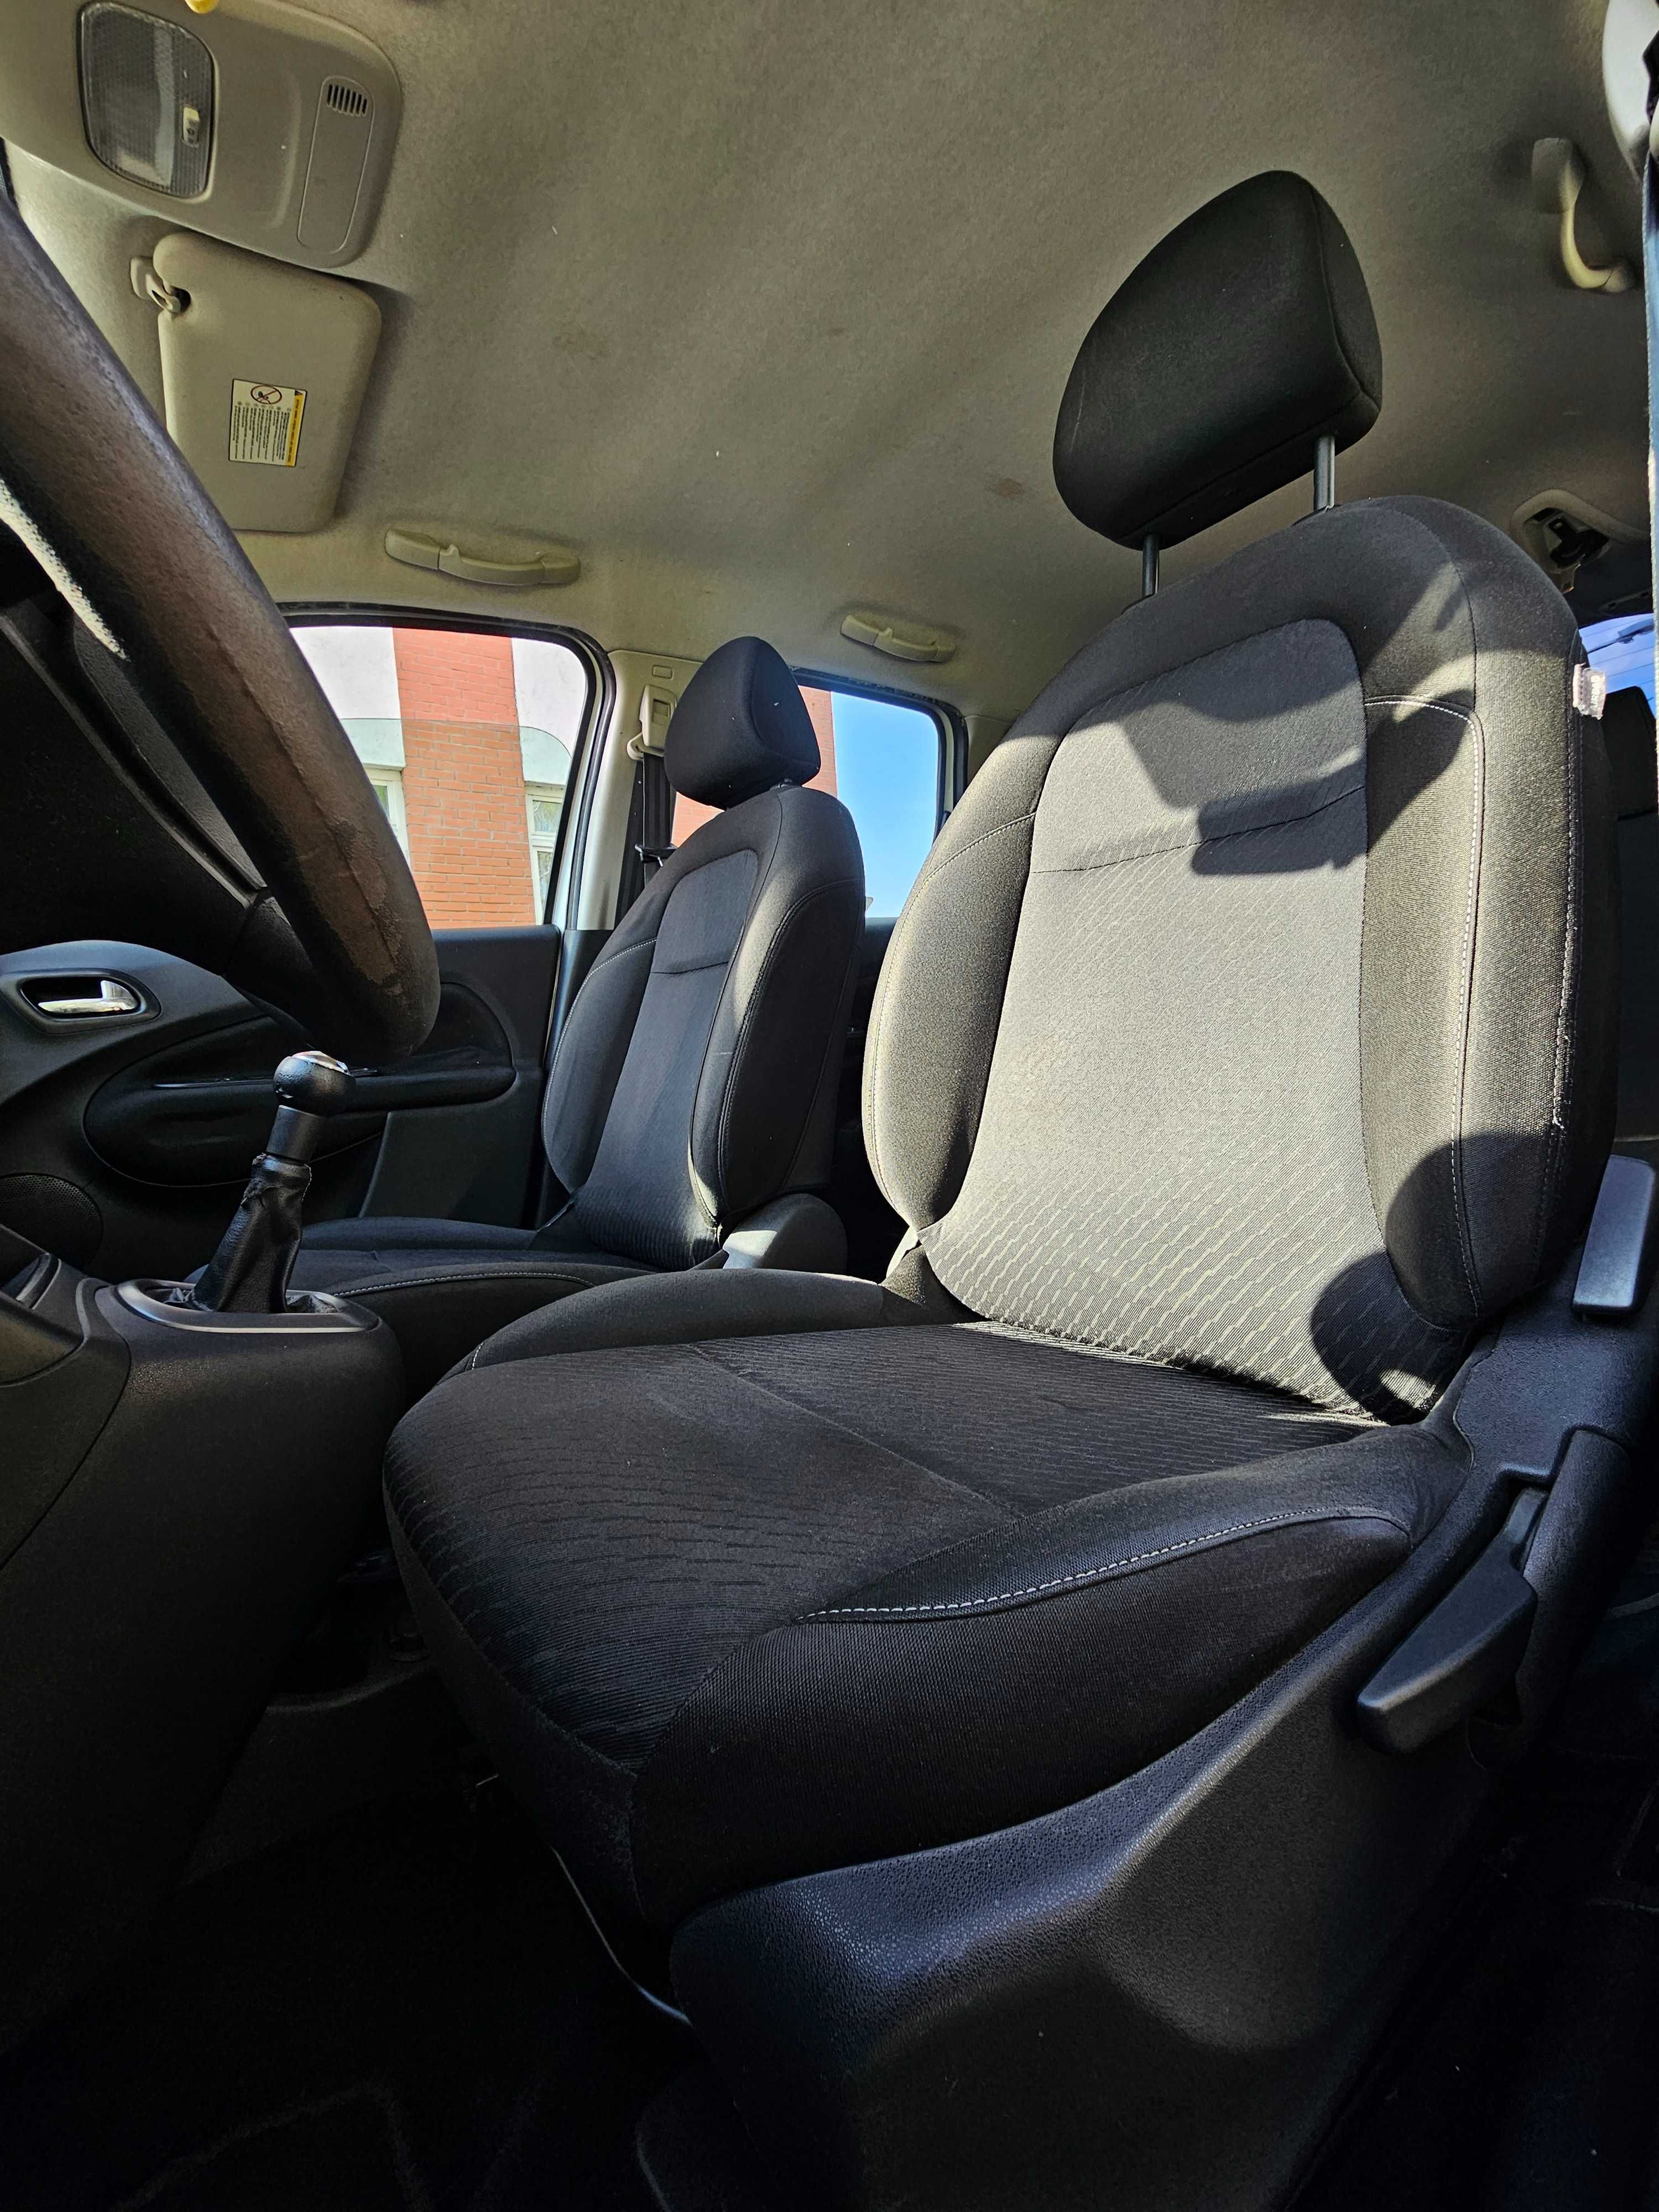 Citroën C3 Picasso 2009r 1.4 Benzyna